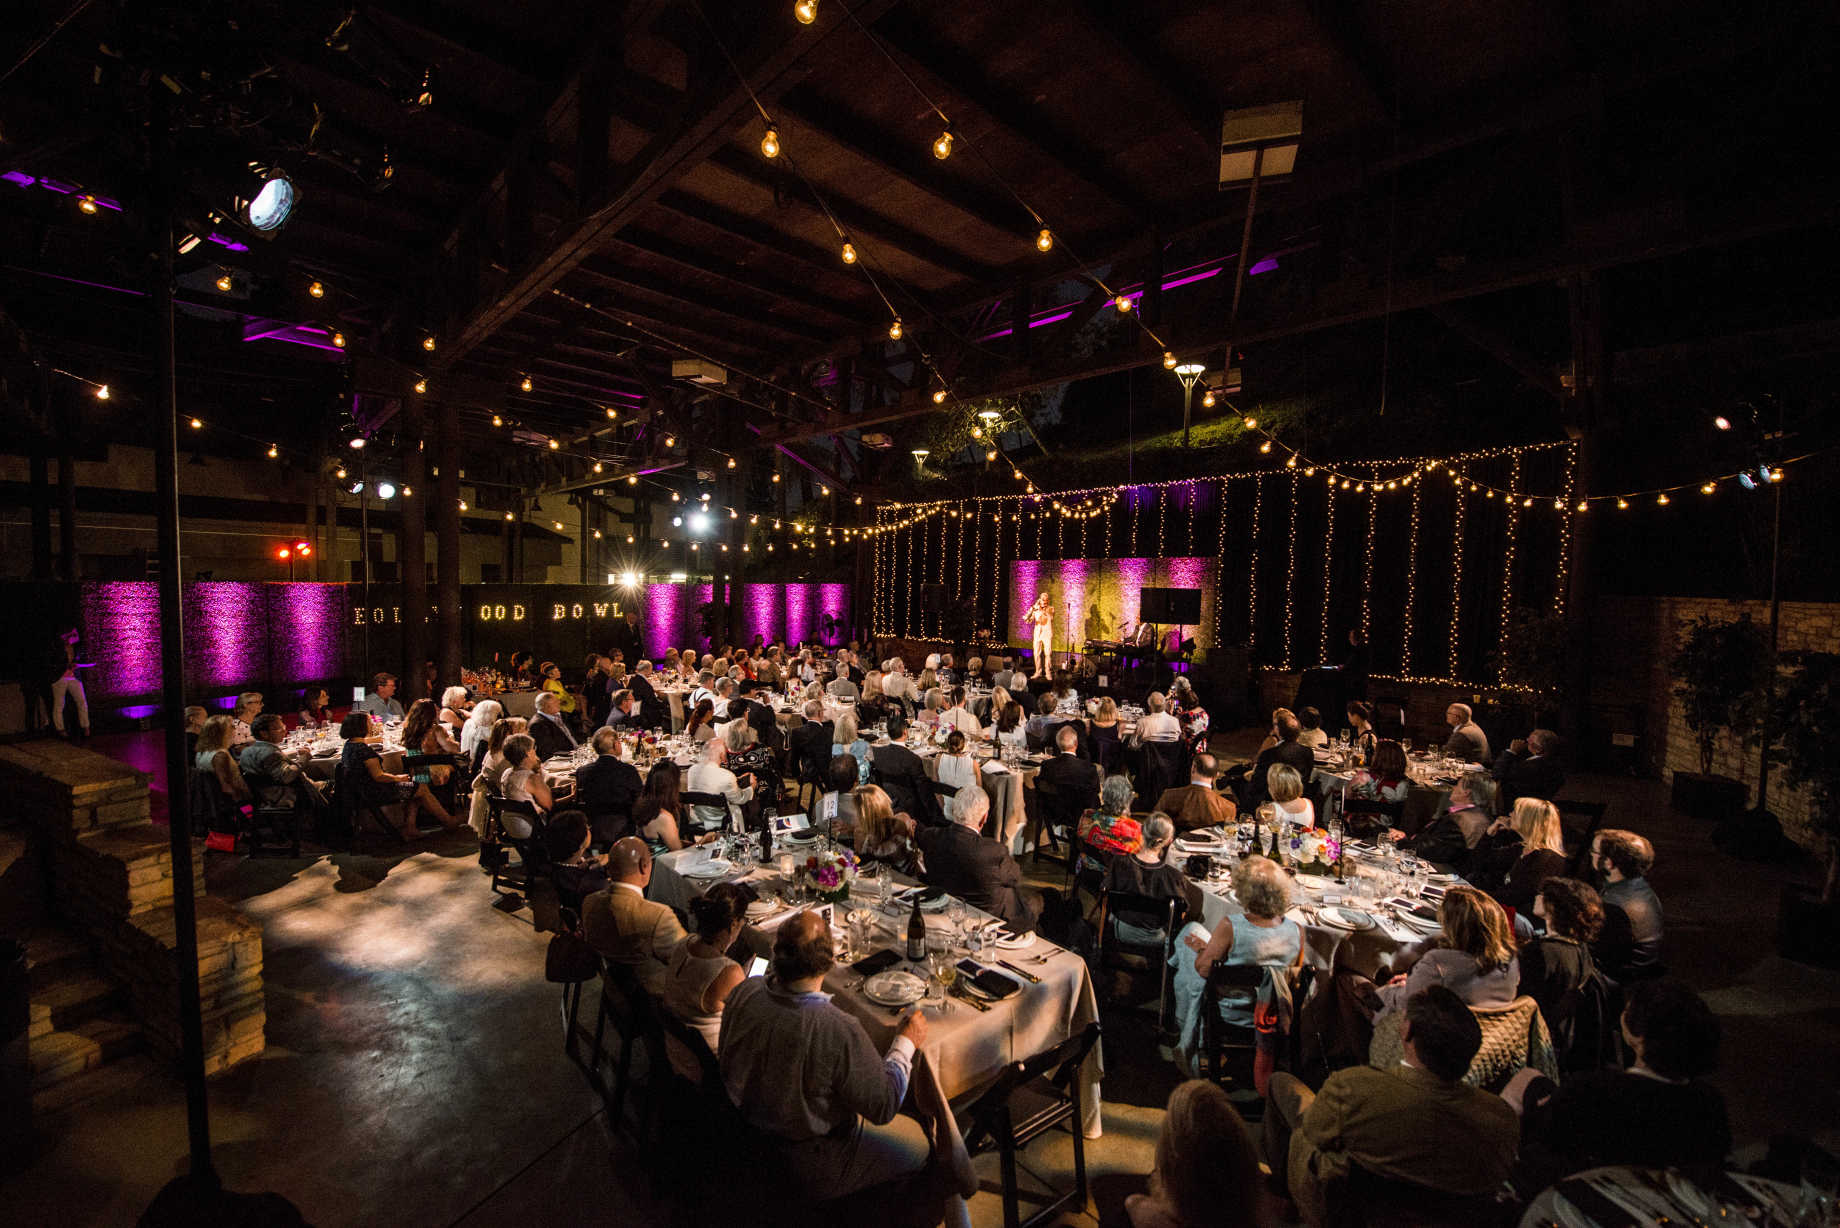 Philharmonic Council dinner held in the Bowl’s Museum Patio